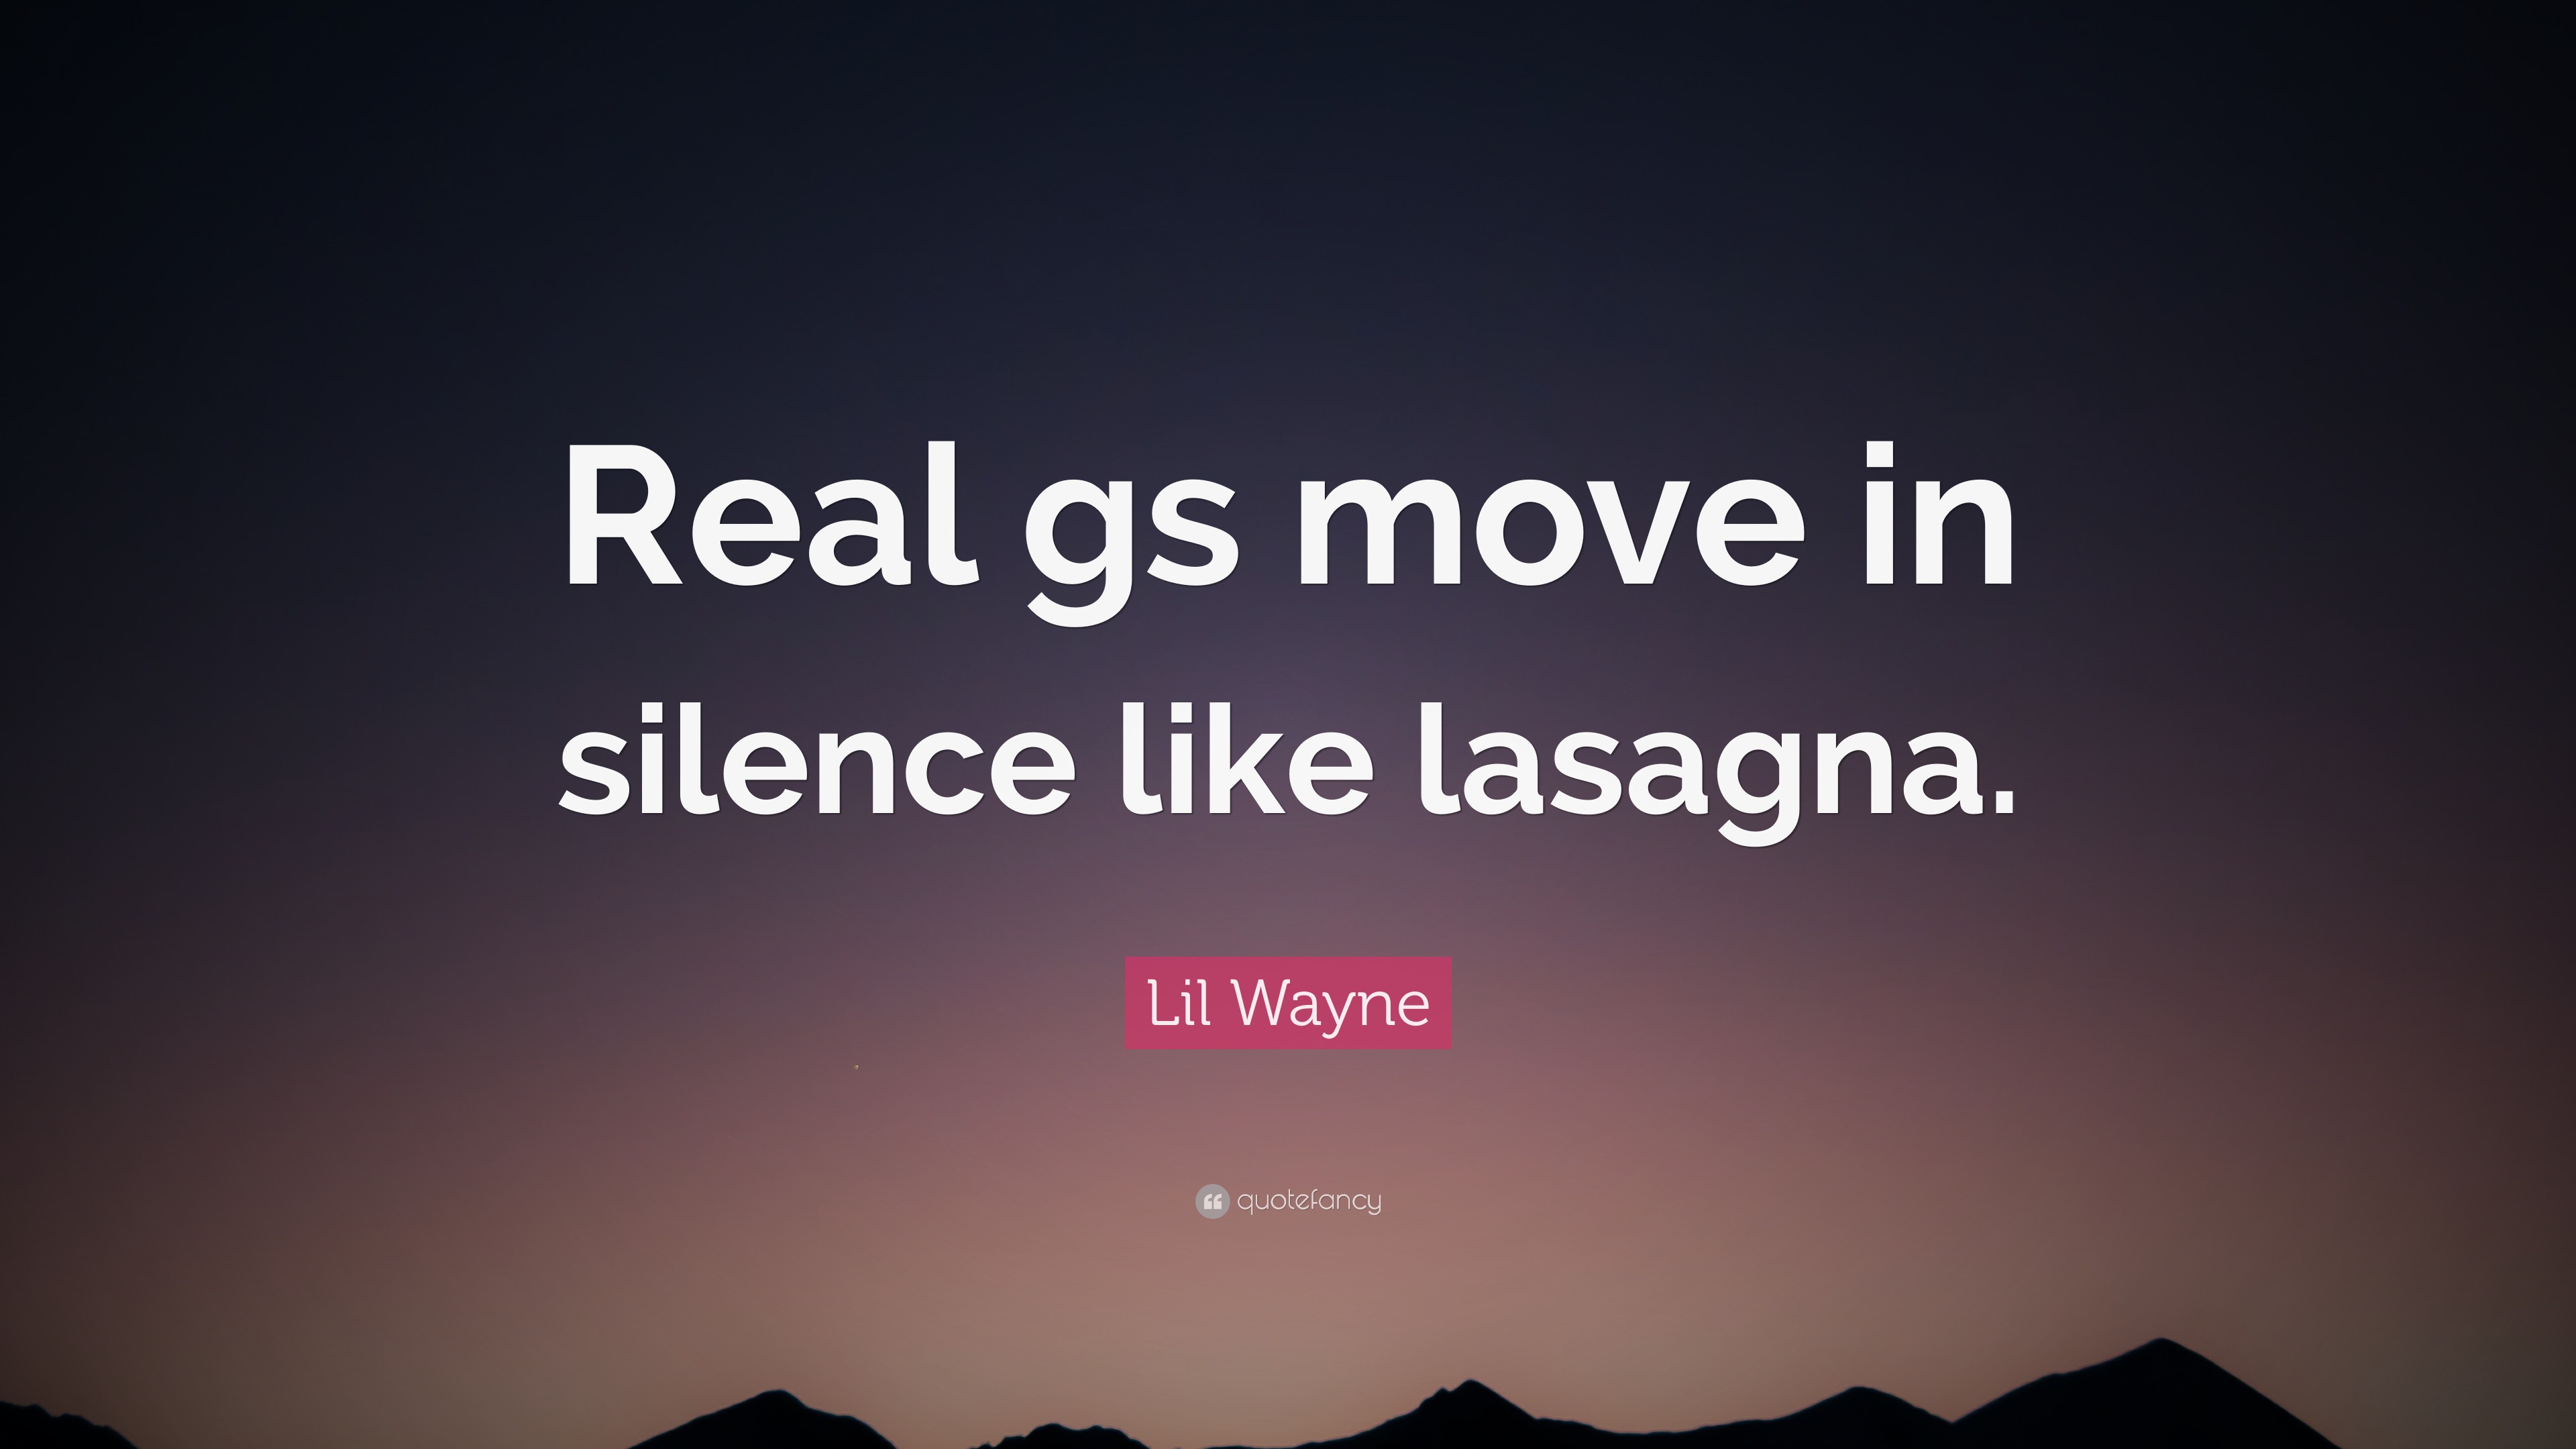 quotes about moving in silence